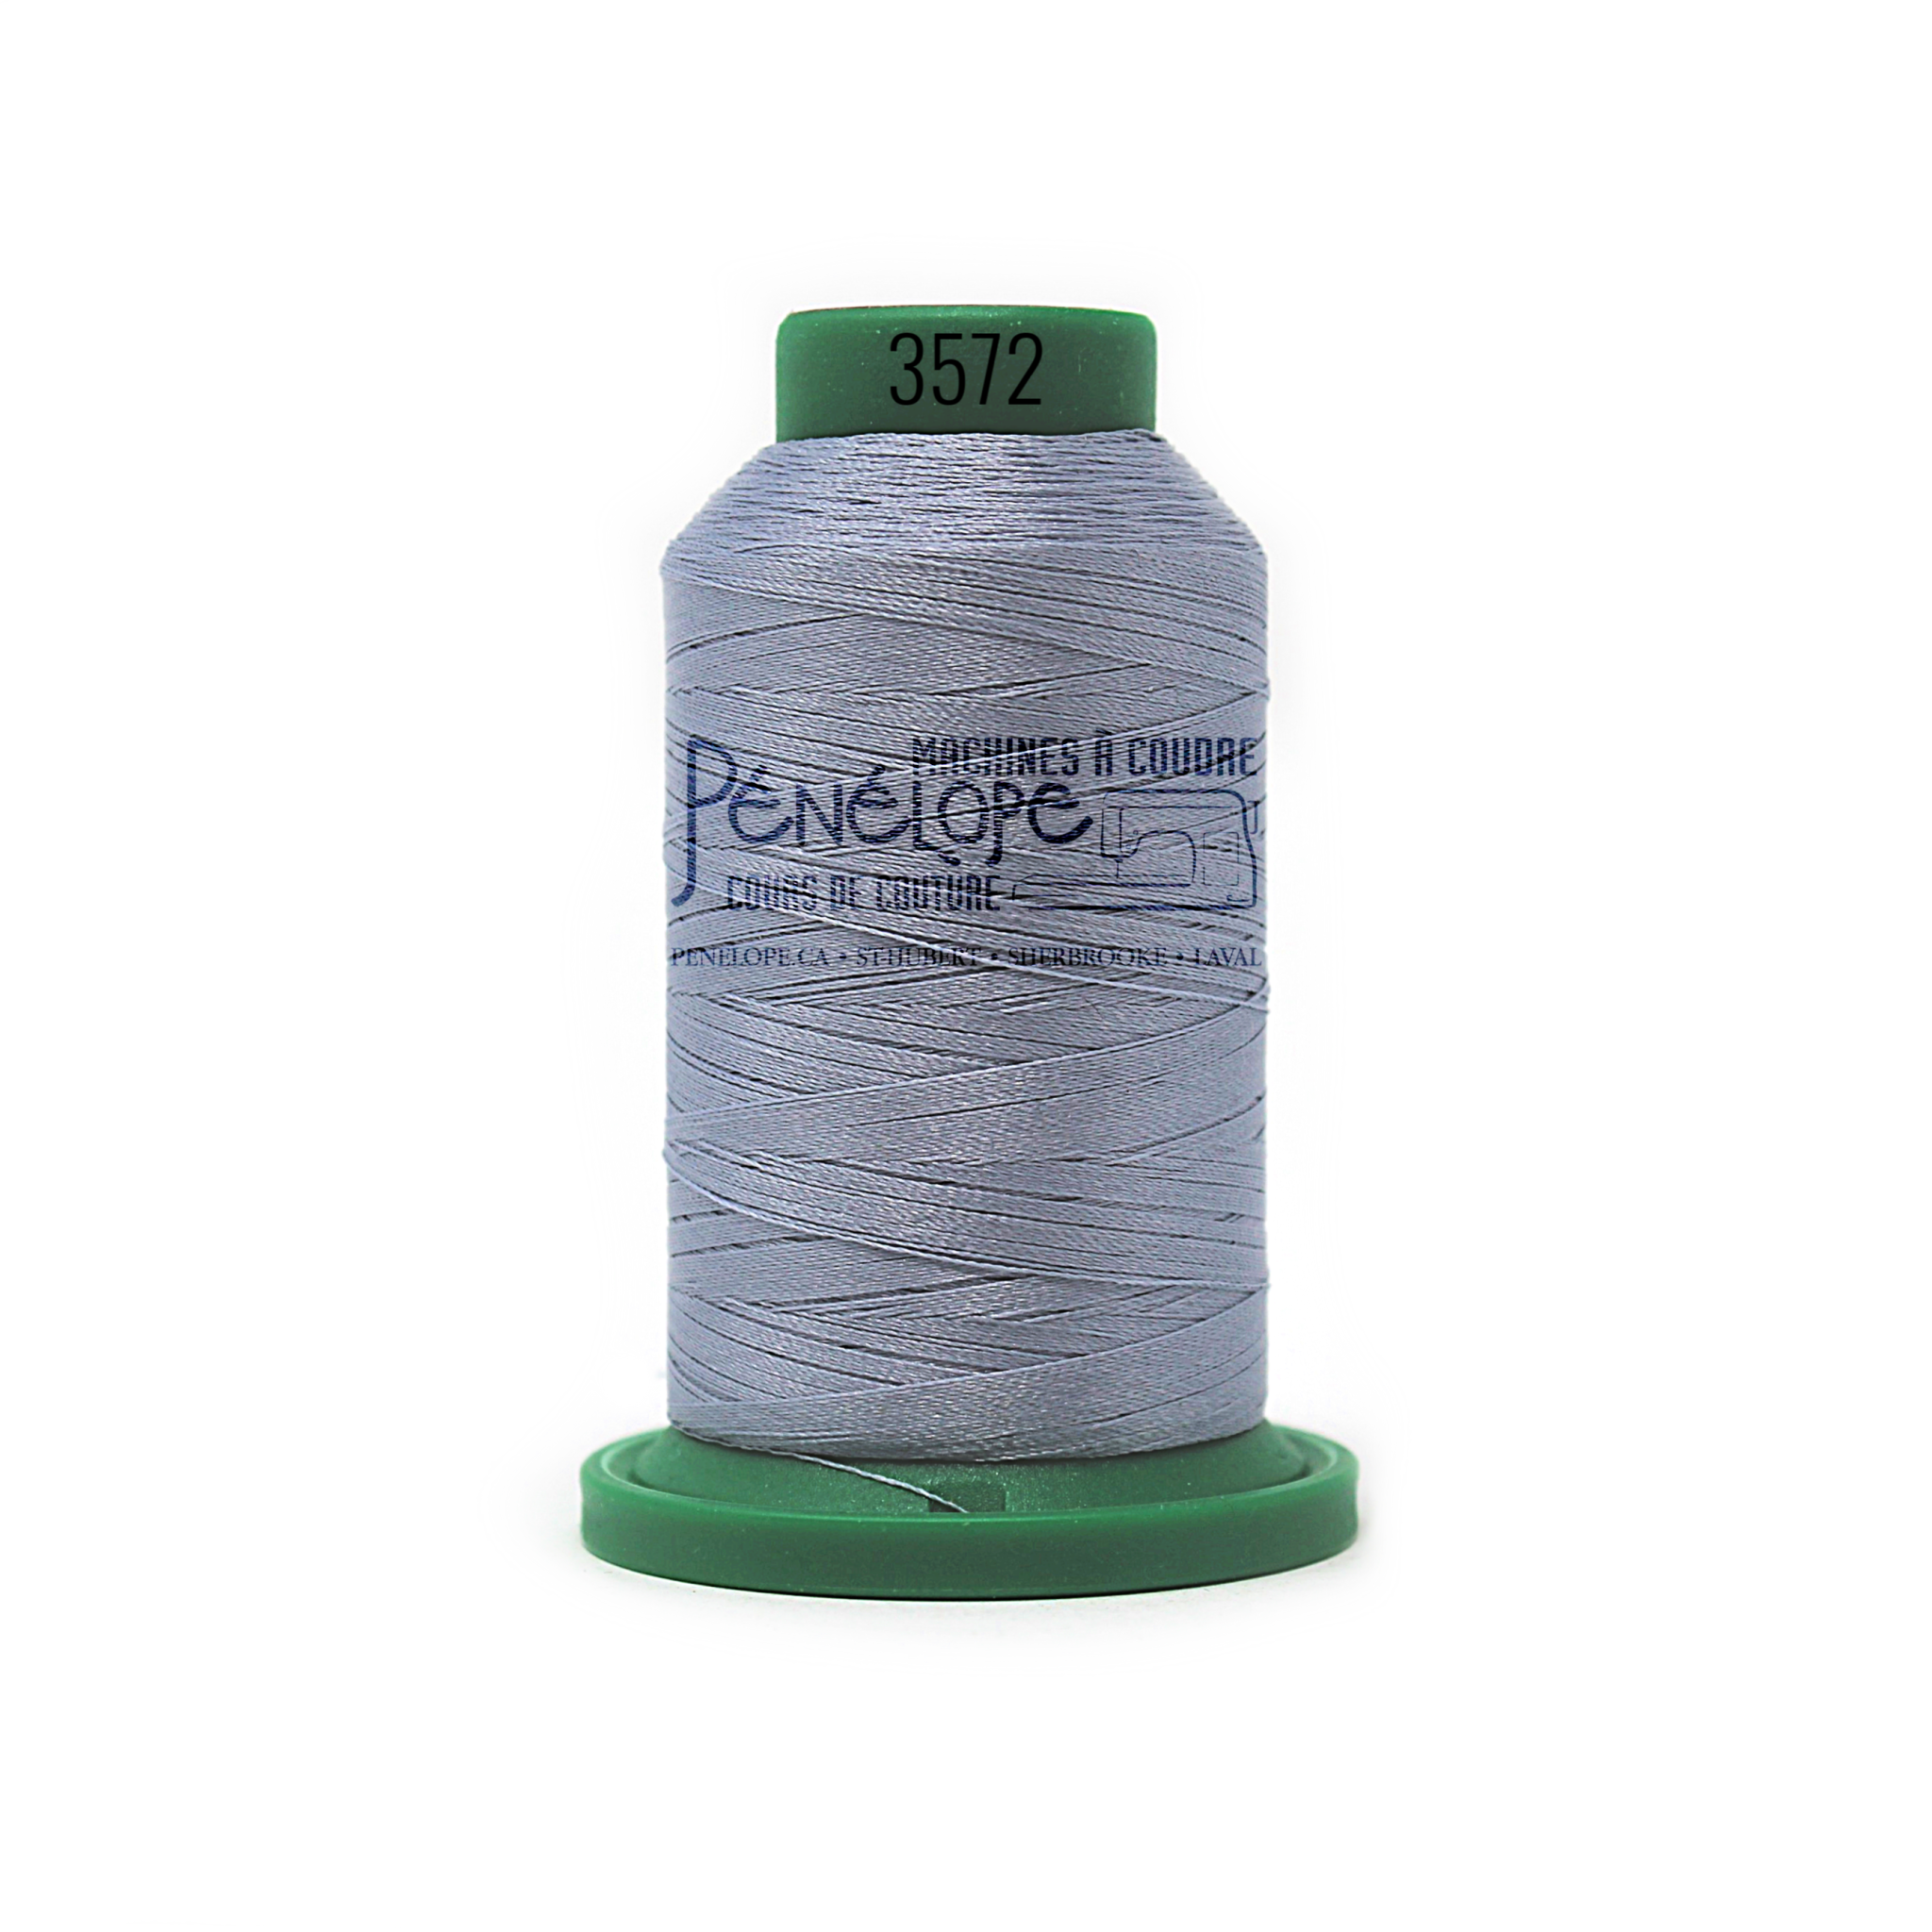 Isacord Isacord sewing and embroidery thread 3572